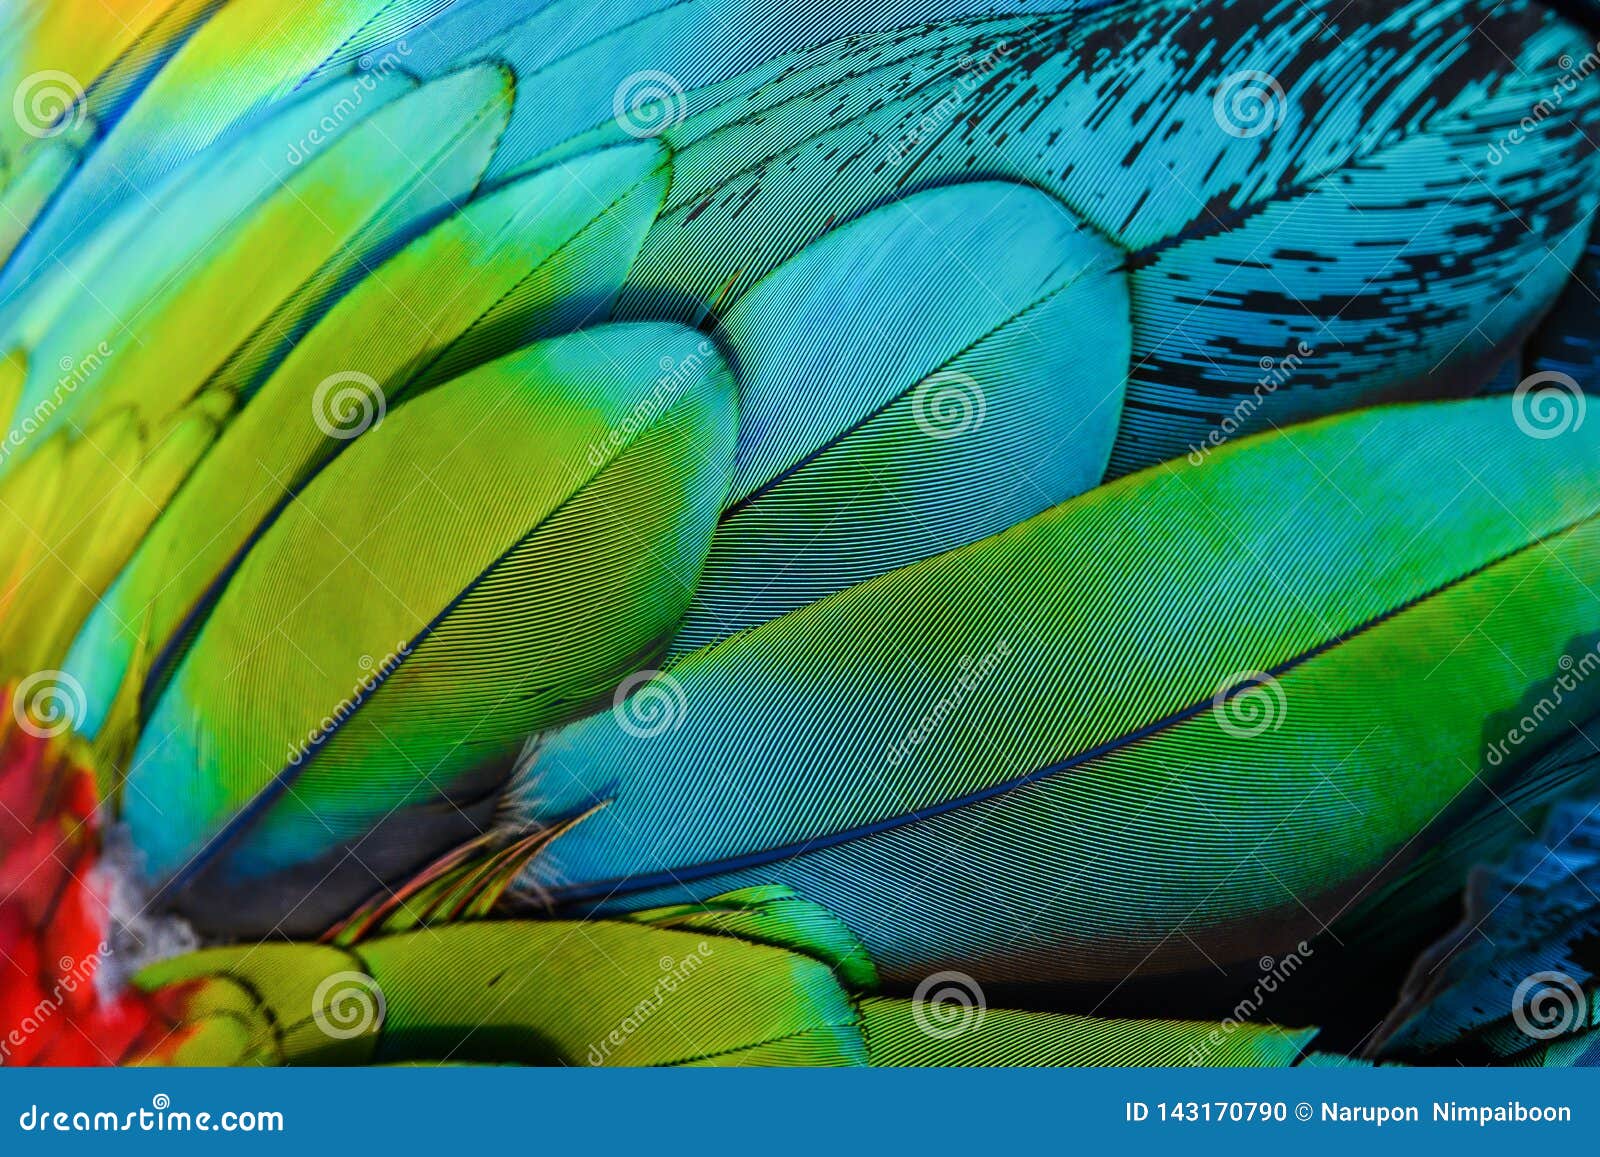 The Great Of Close Up Of Blue And Gold Macaw Bird Feathers With